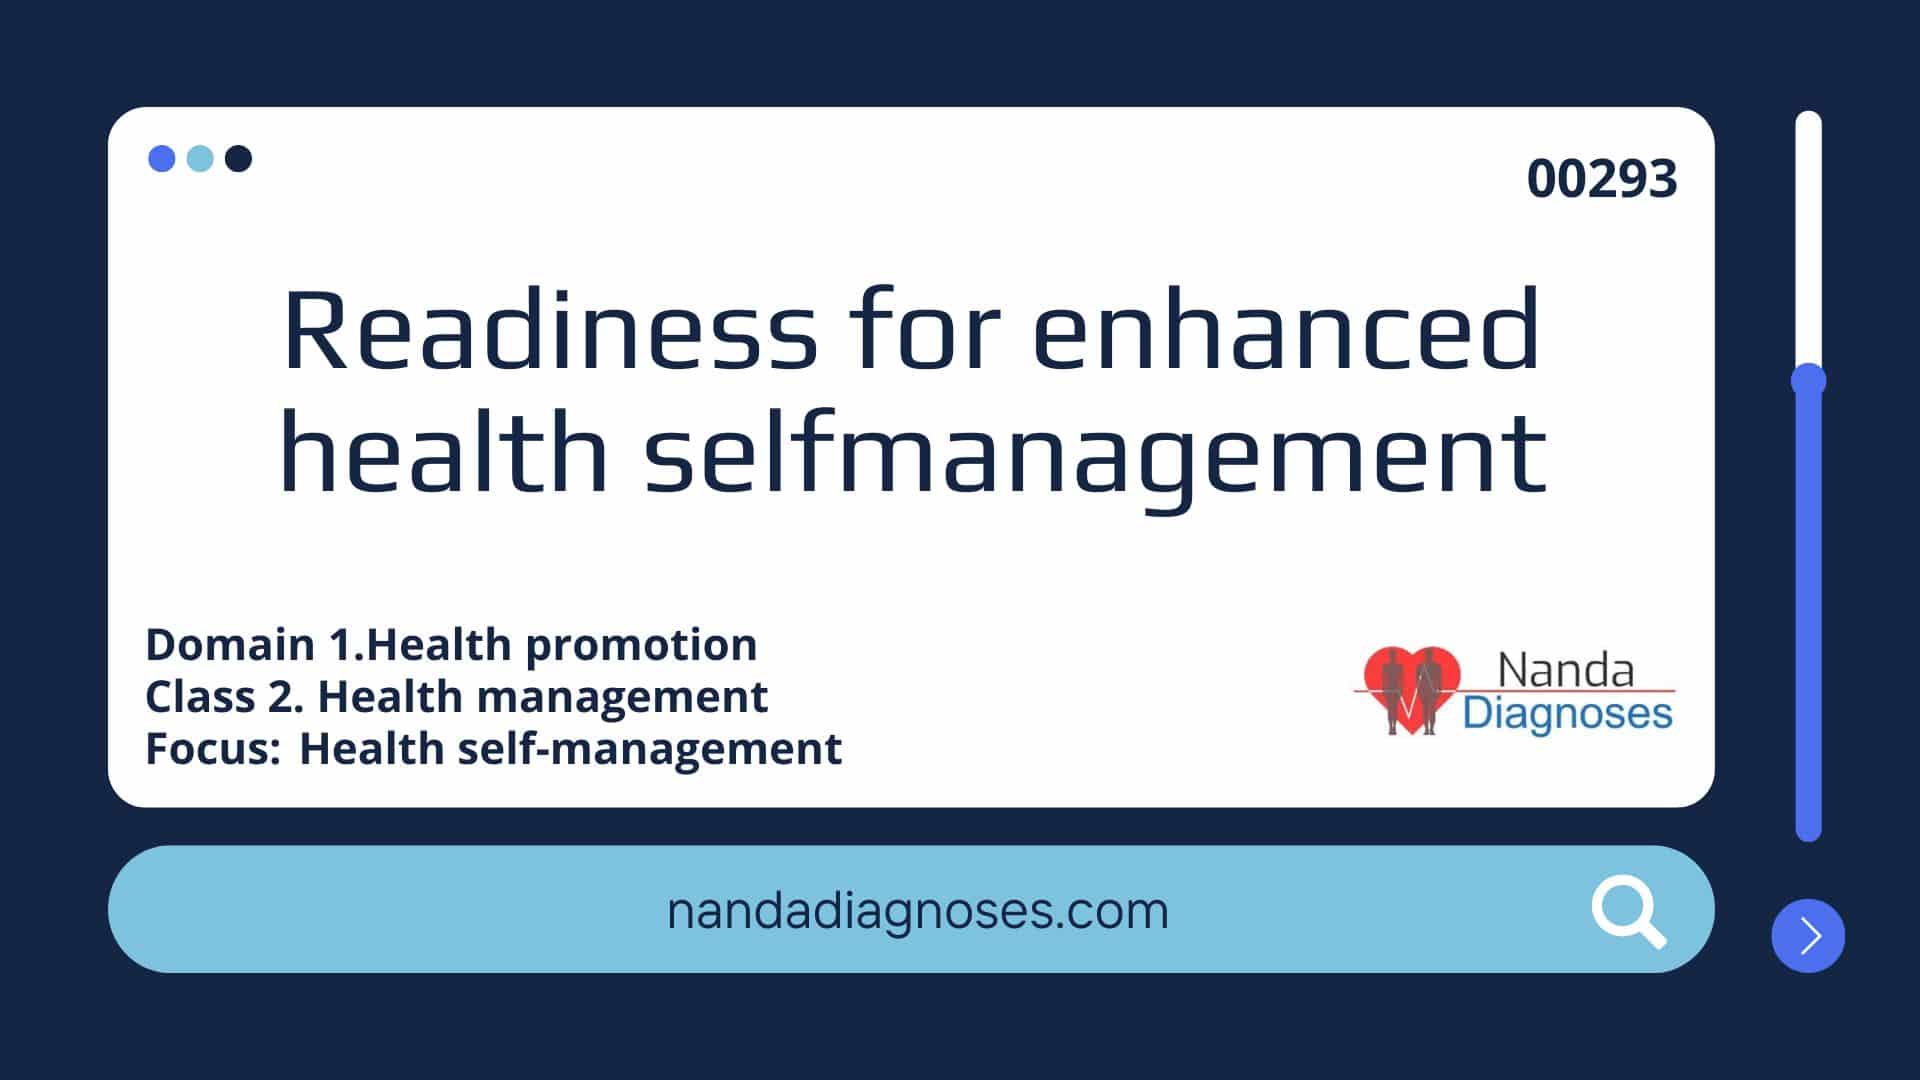 Readiness for enhanced health selfmanagement